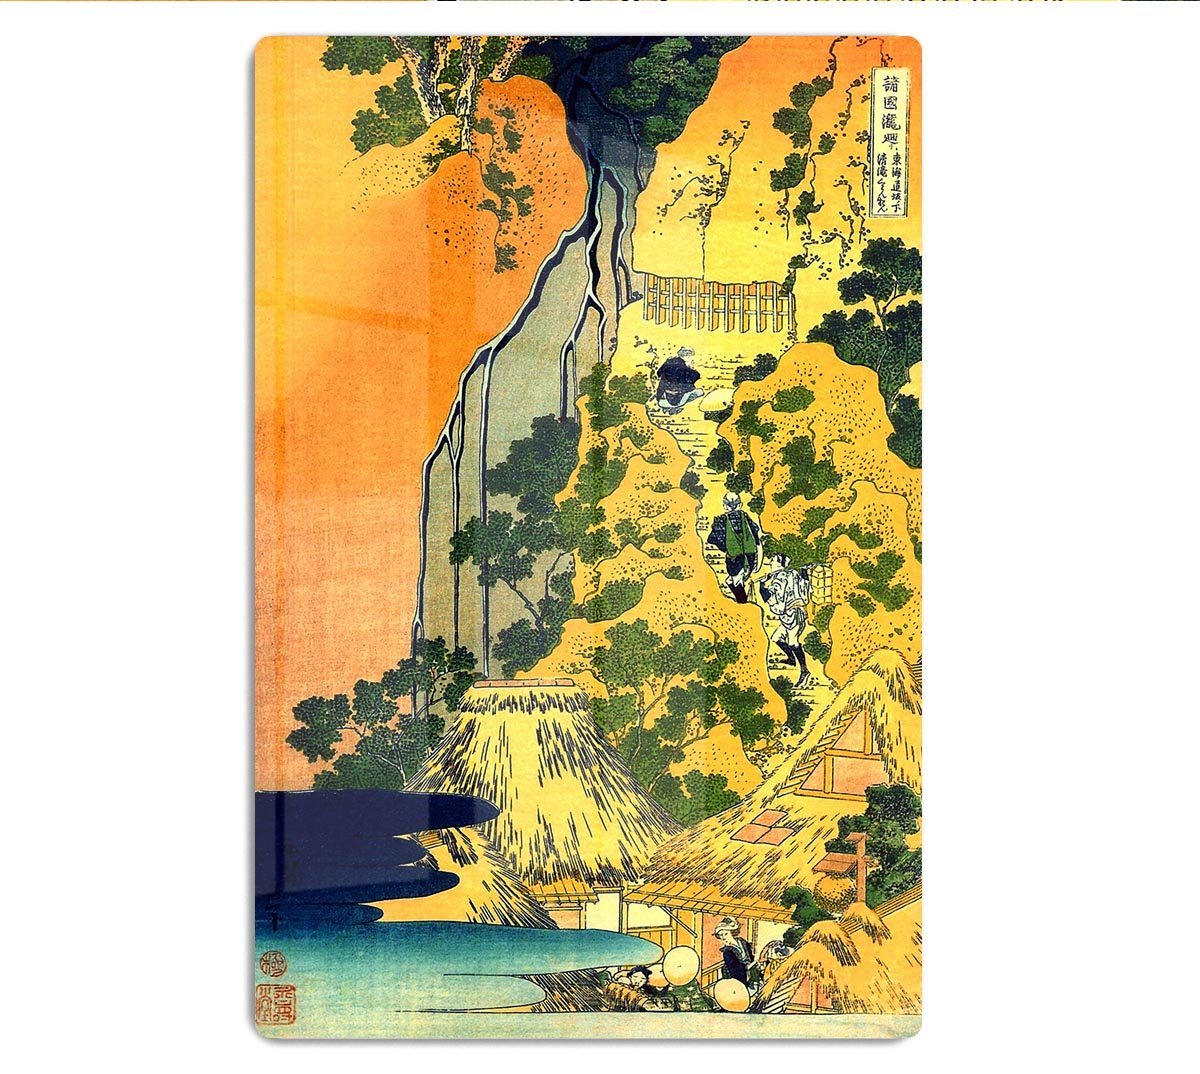 Waterfalls in all provinces by Hokusai HD Metal Print